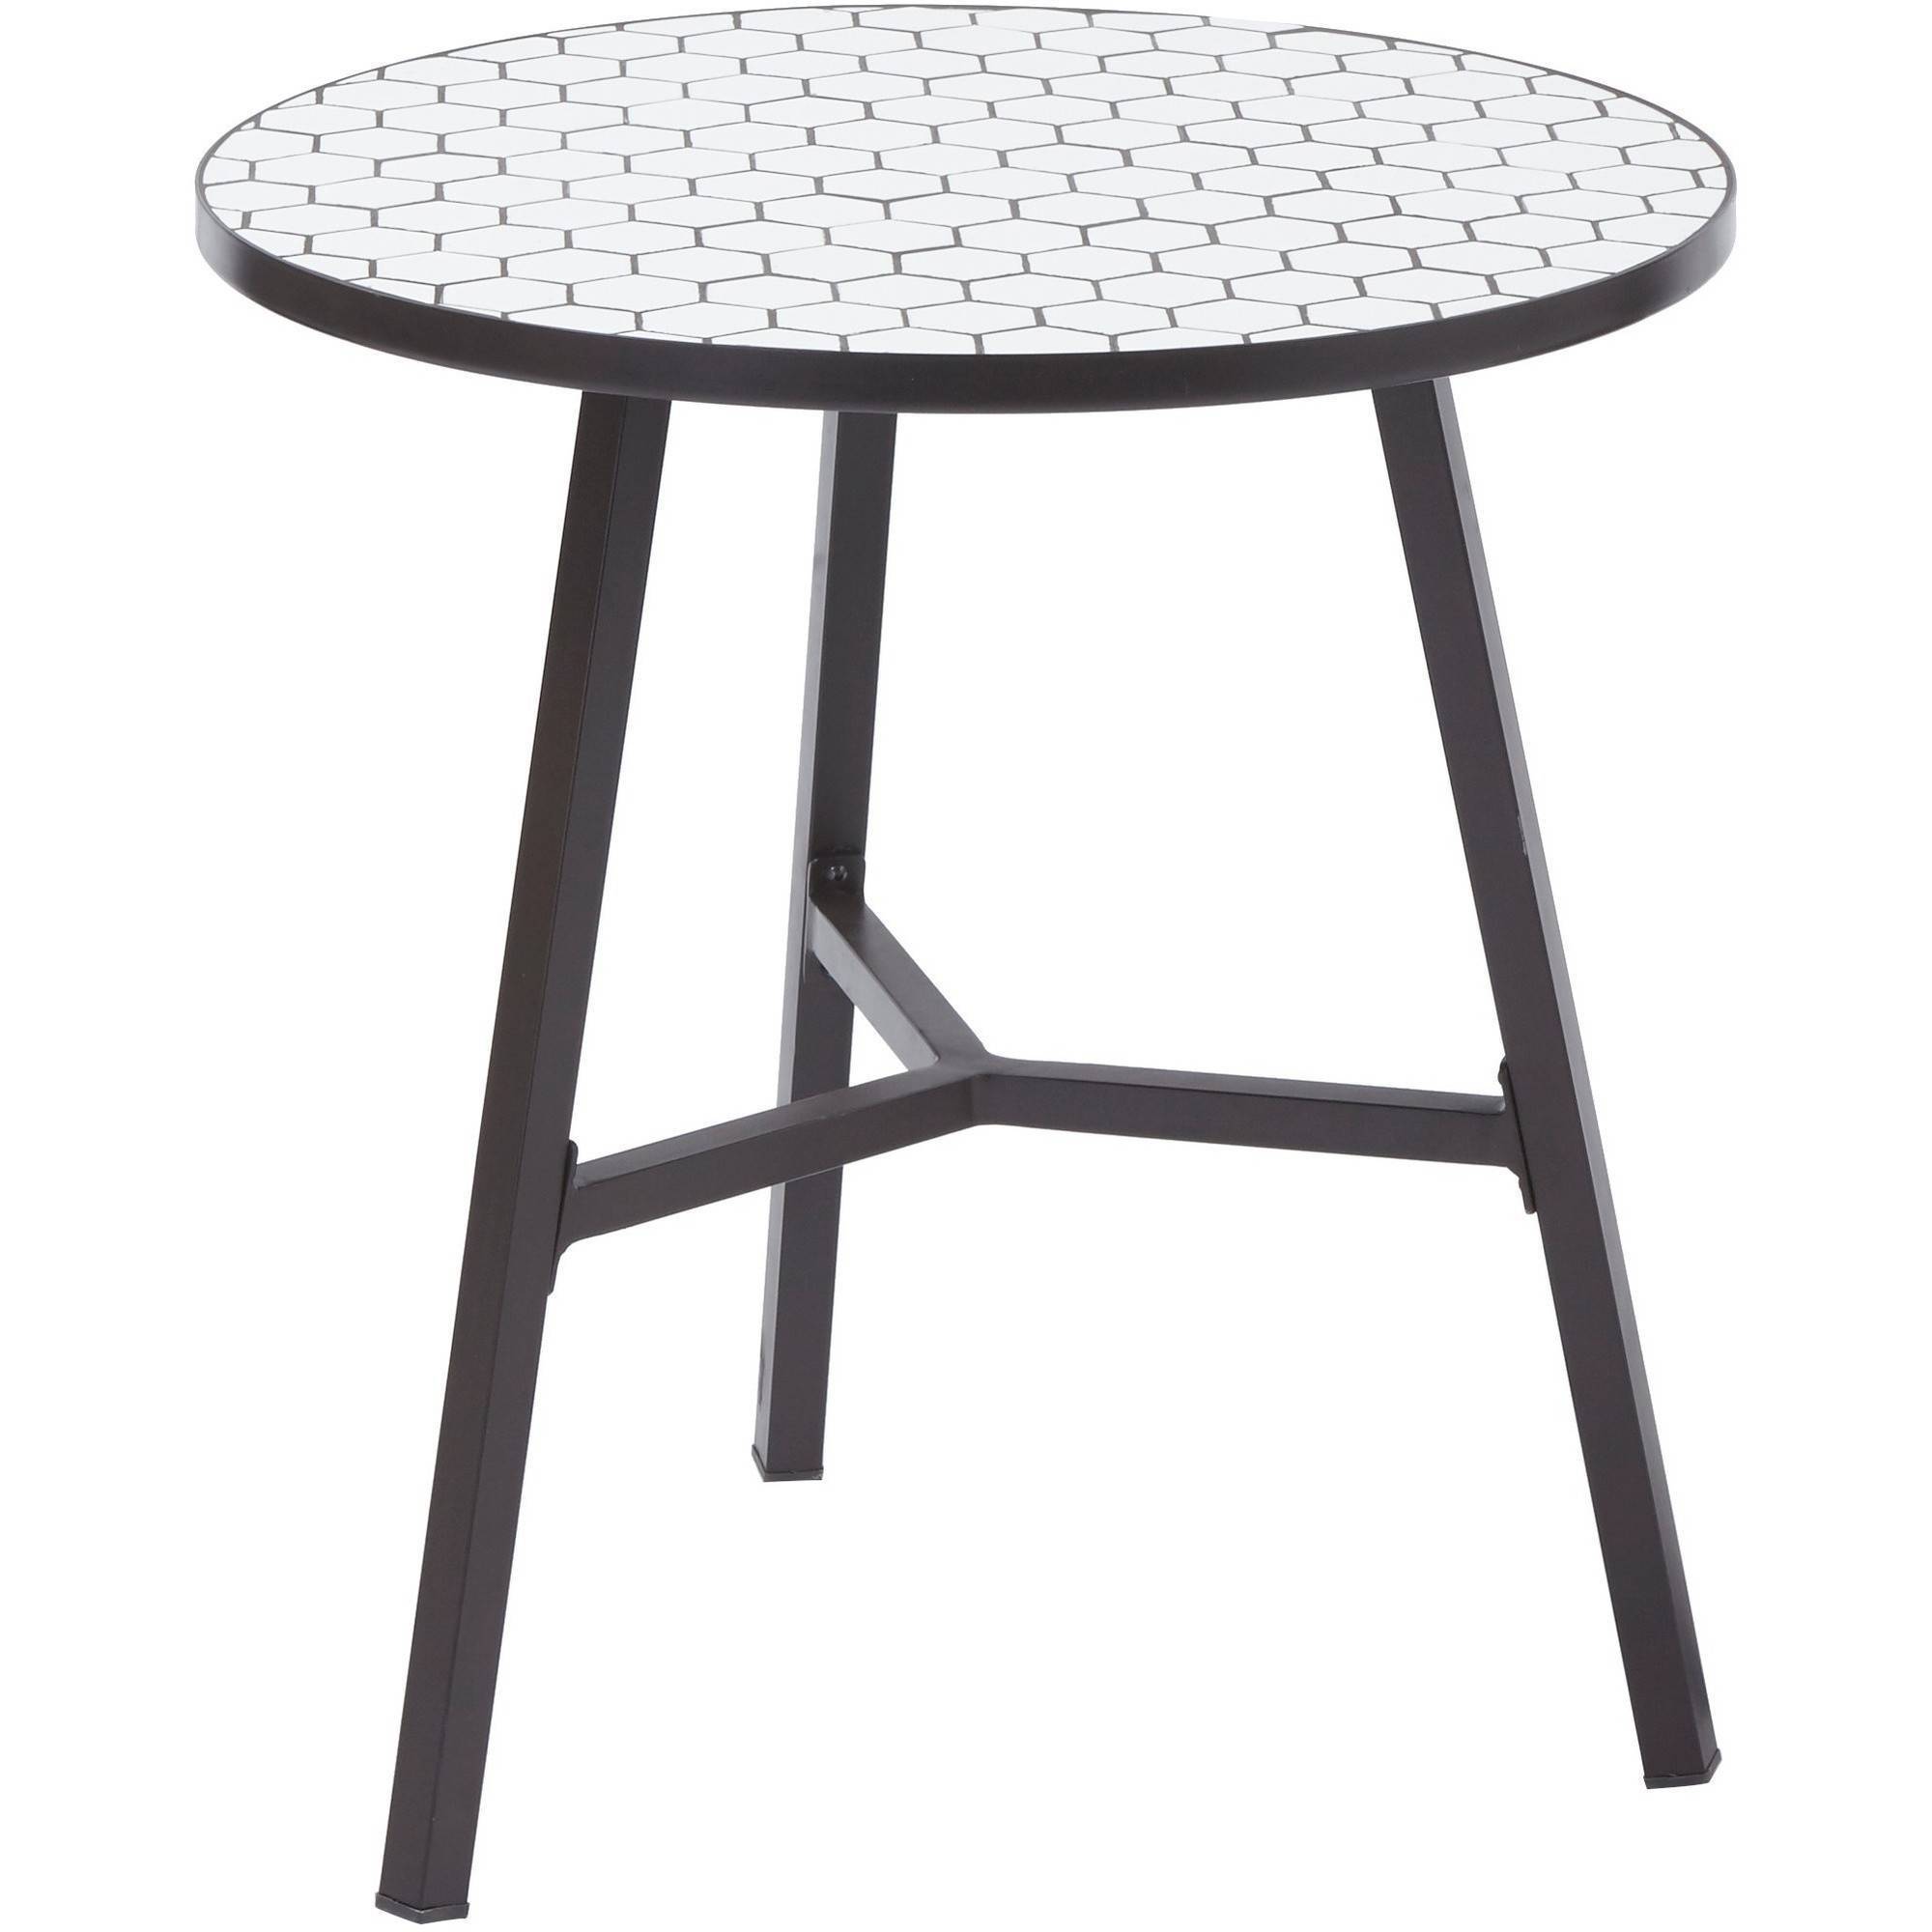 outdoor table and chairs patio furniture - walmart.com UTWIPEP